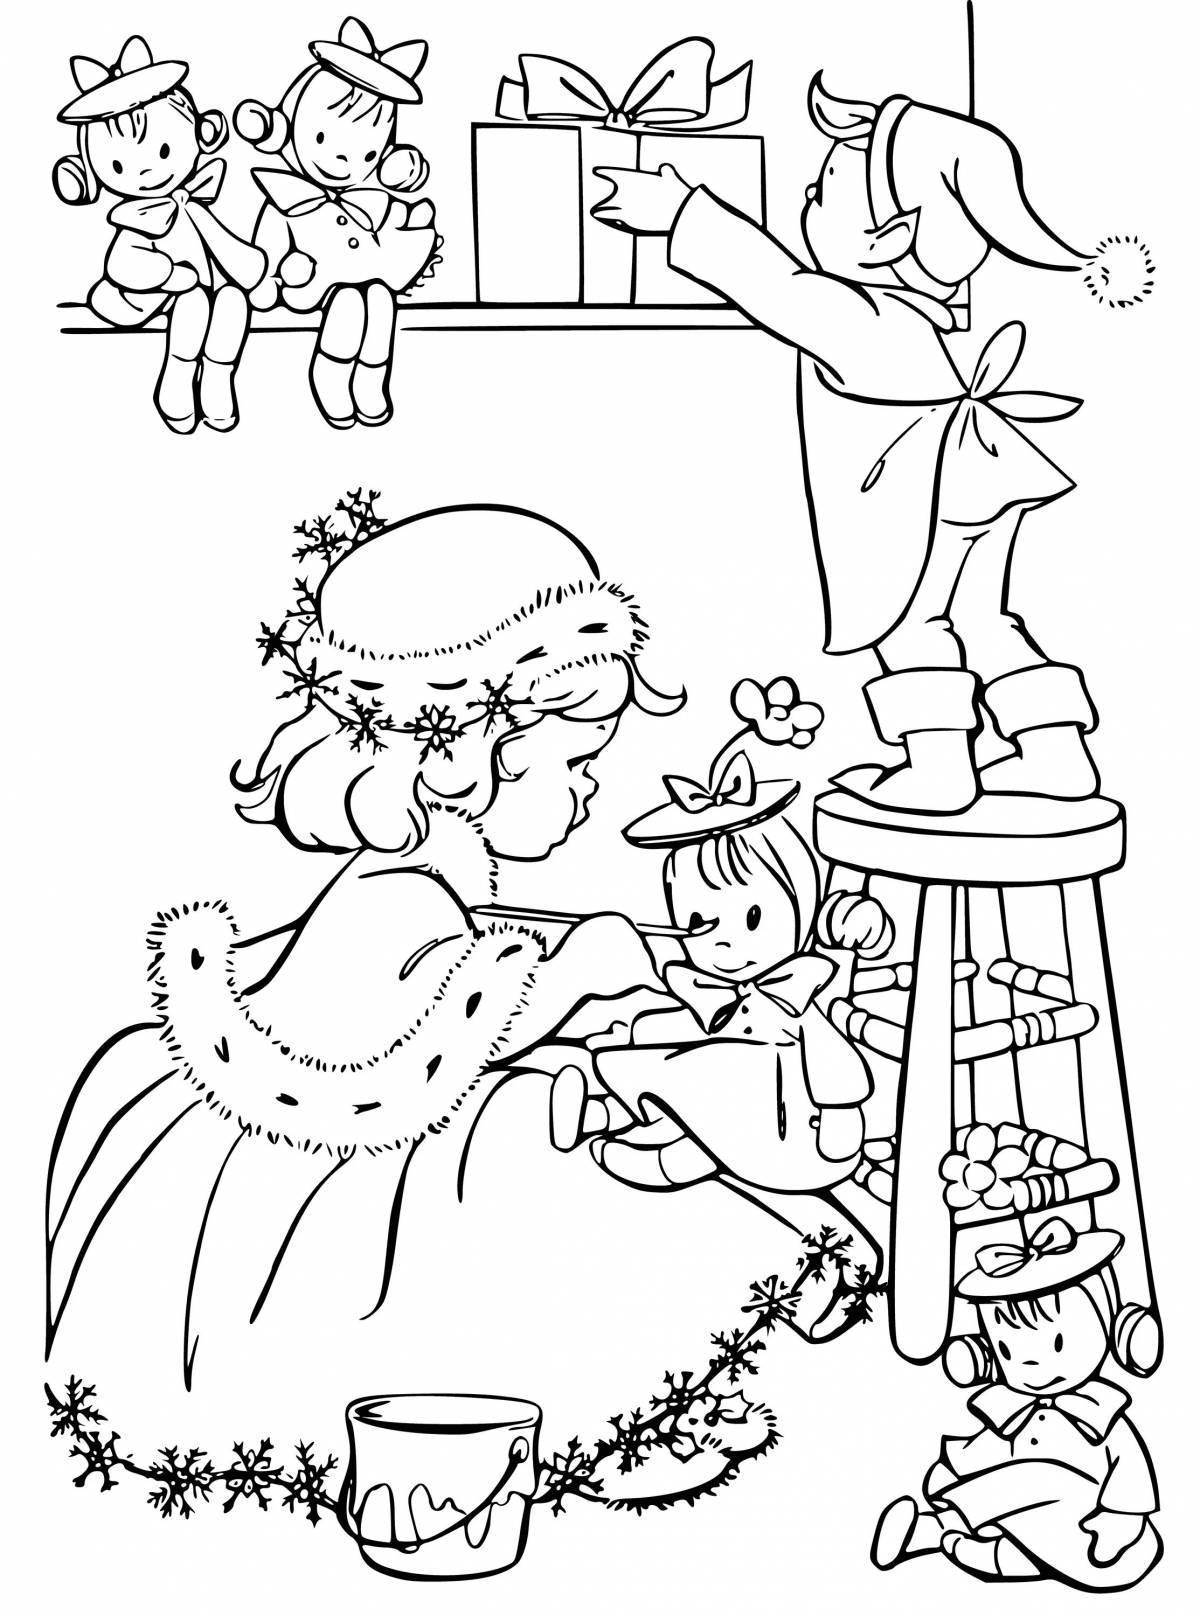 Charming Christmas story coloring book